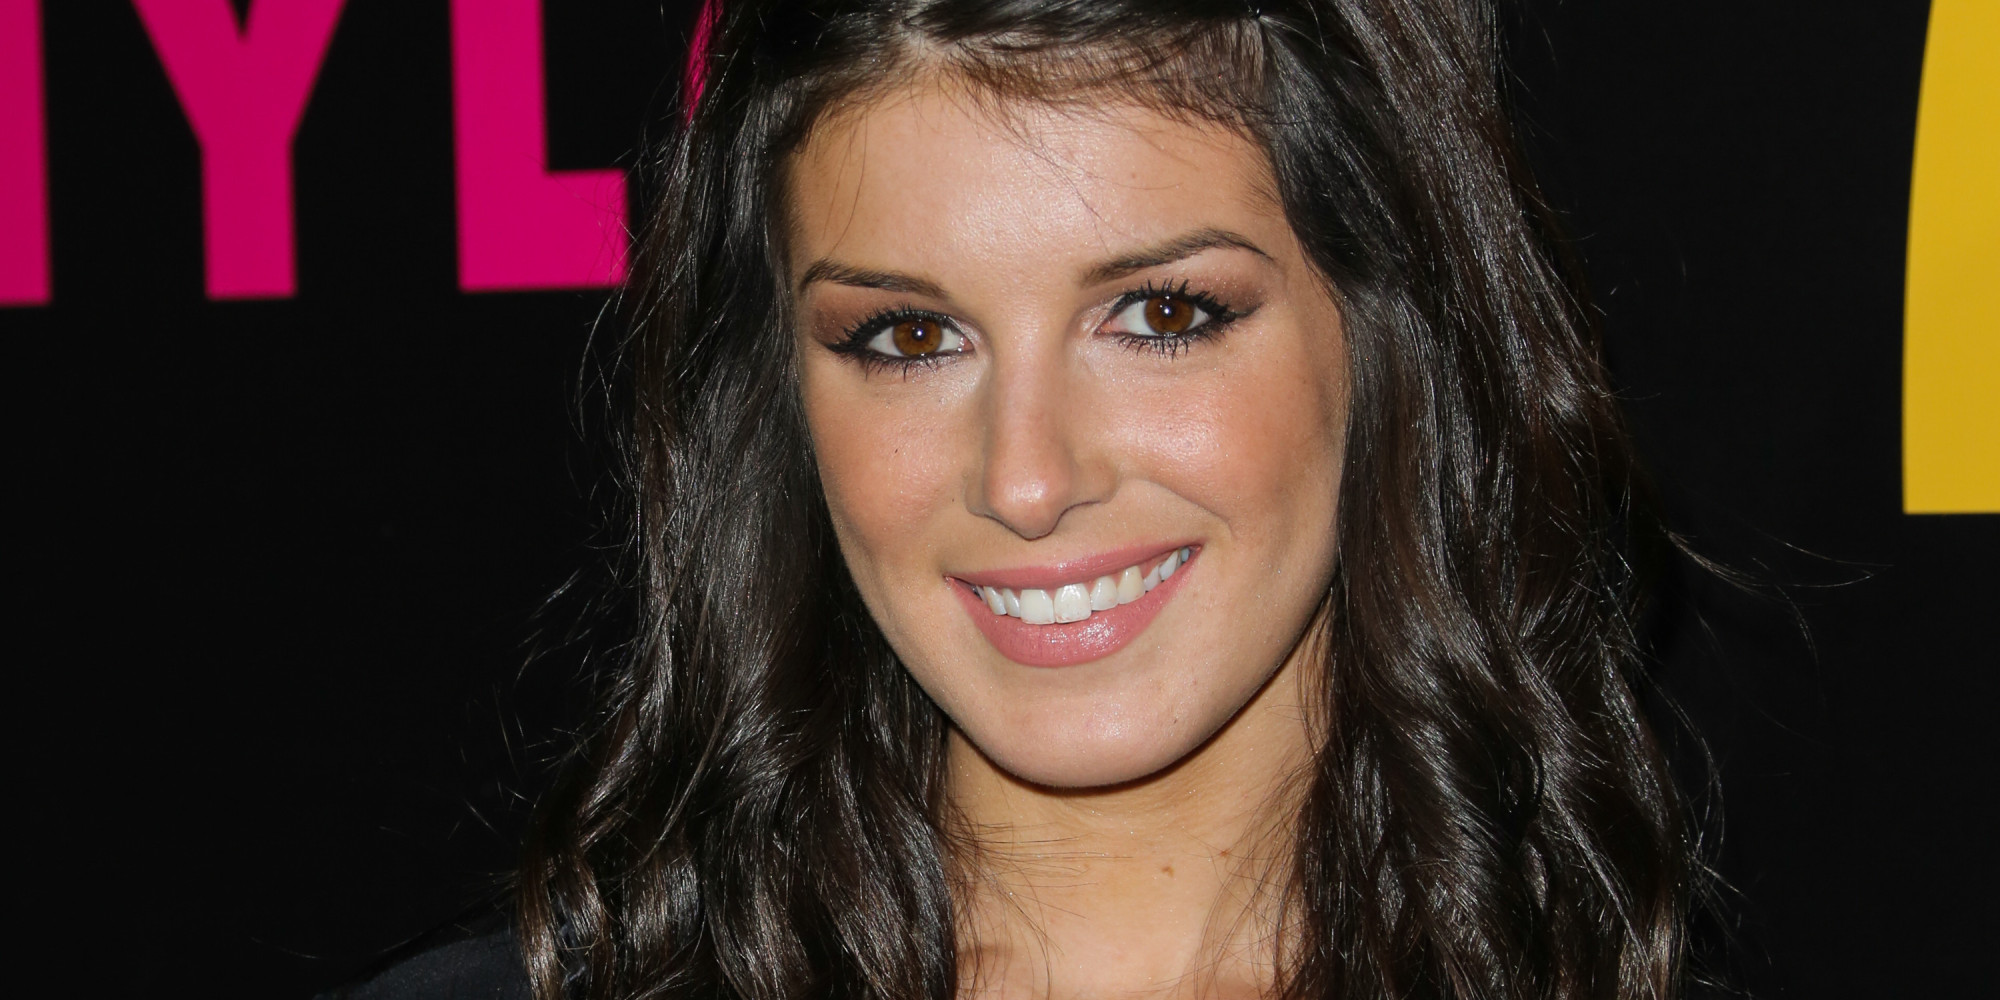 Shenae Grimes Insults Hamilton On Twitter (Ouch!)